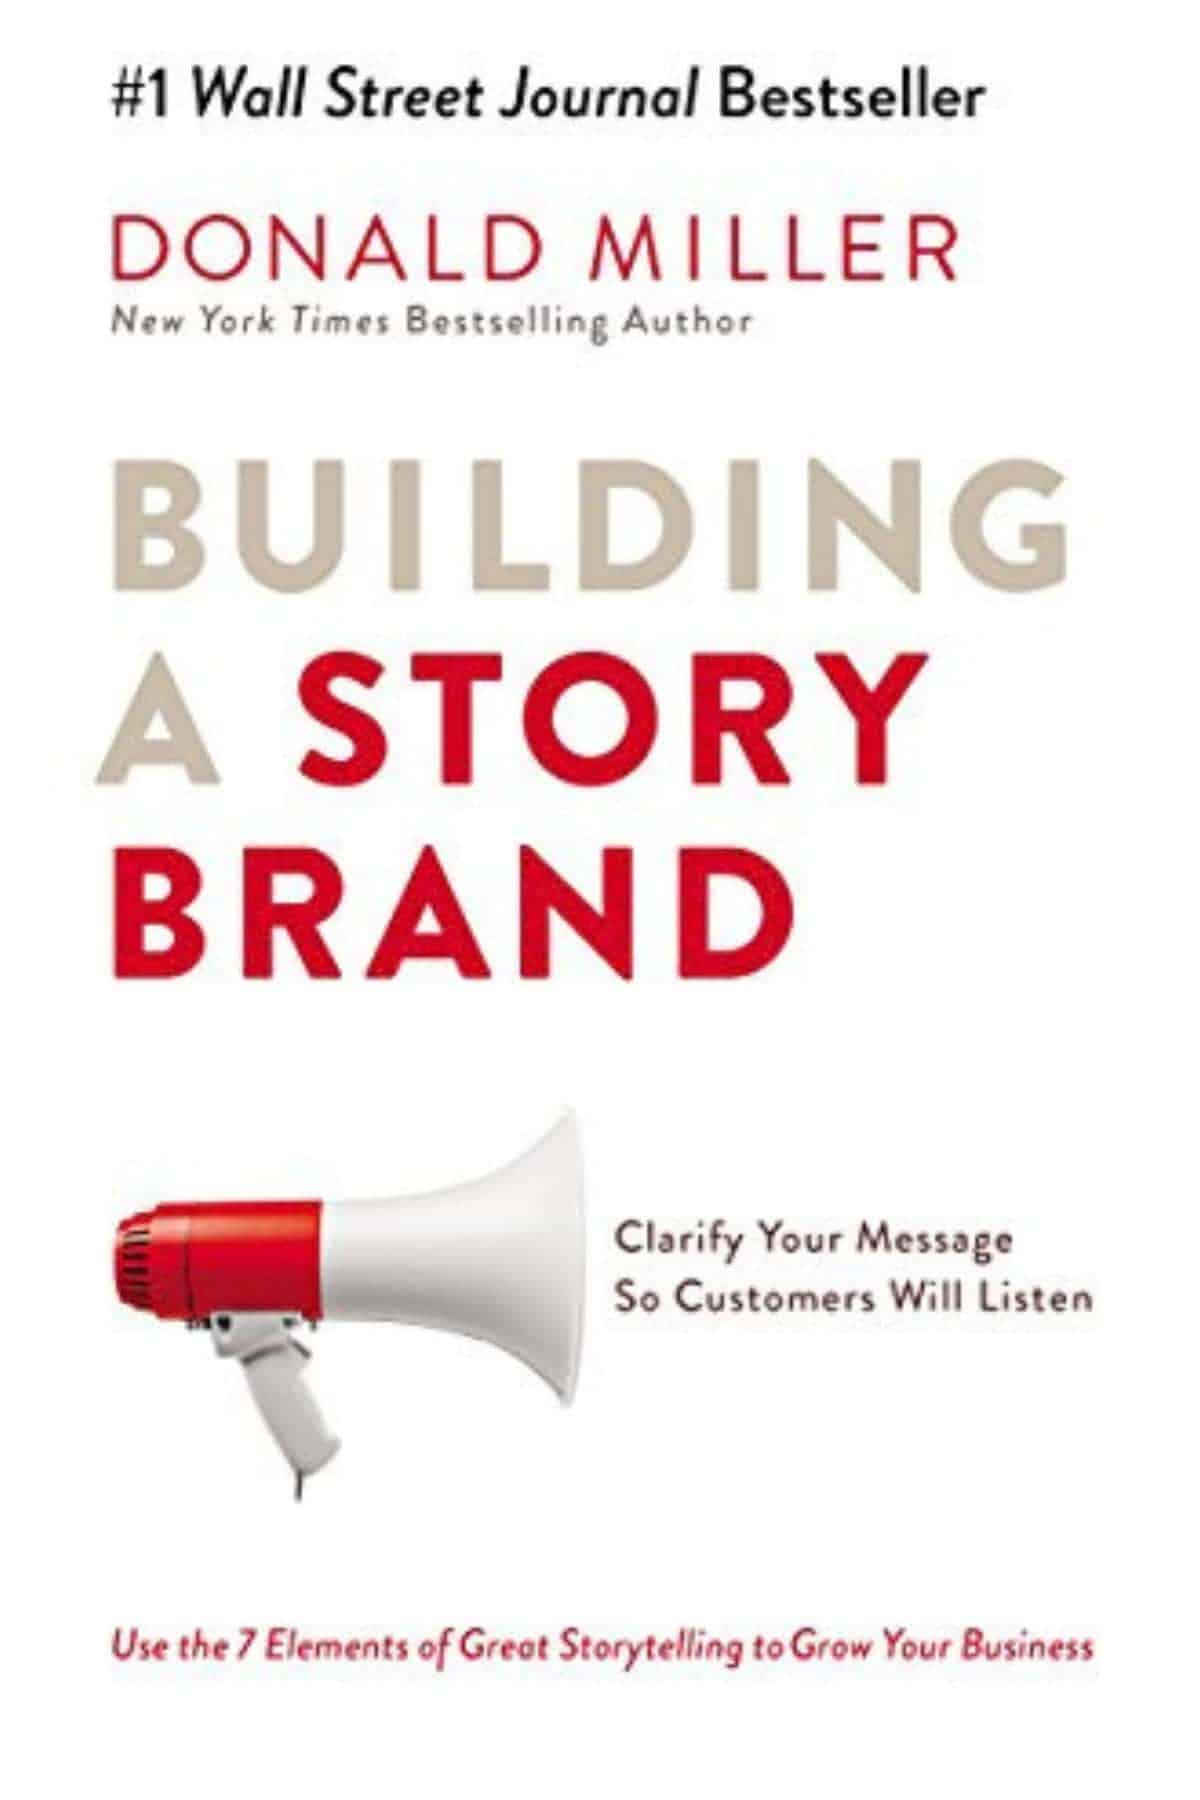 Building a StoryBrand: Clarify Your Message So Customers Will Listen by Donald Miller ($9.99) | Amazon's Best Selling Tech Kindle eBooks